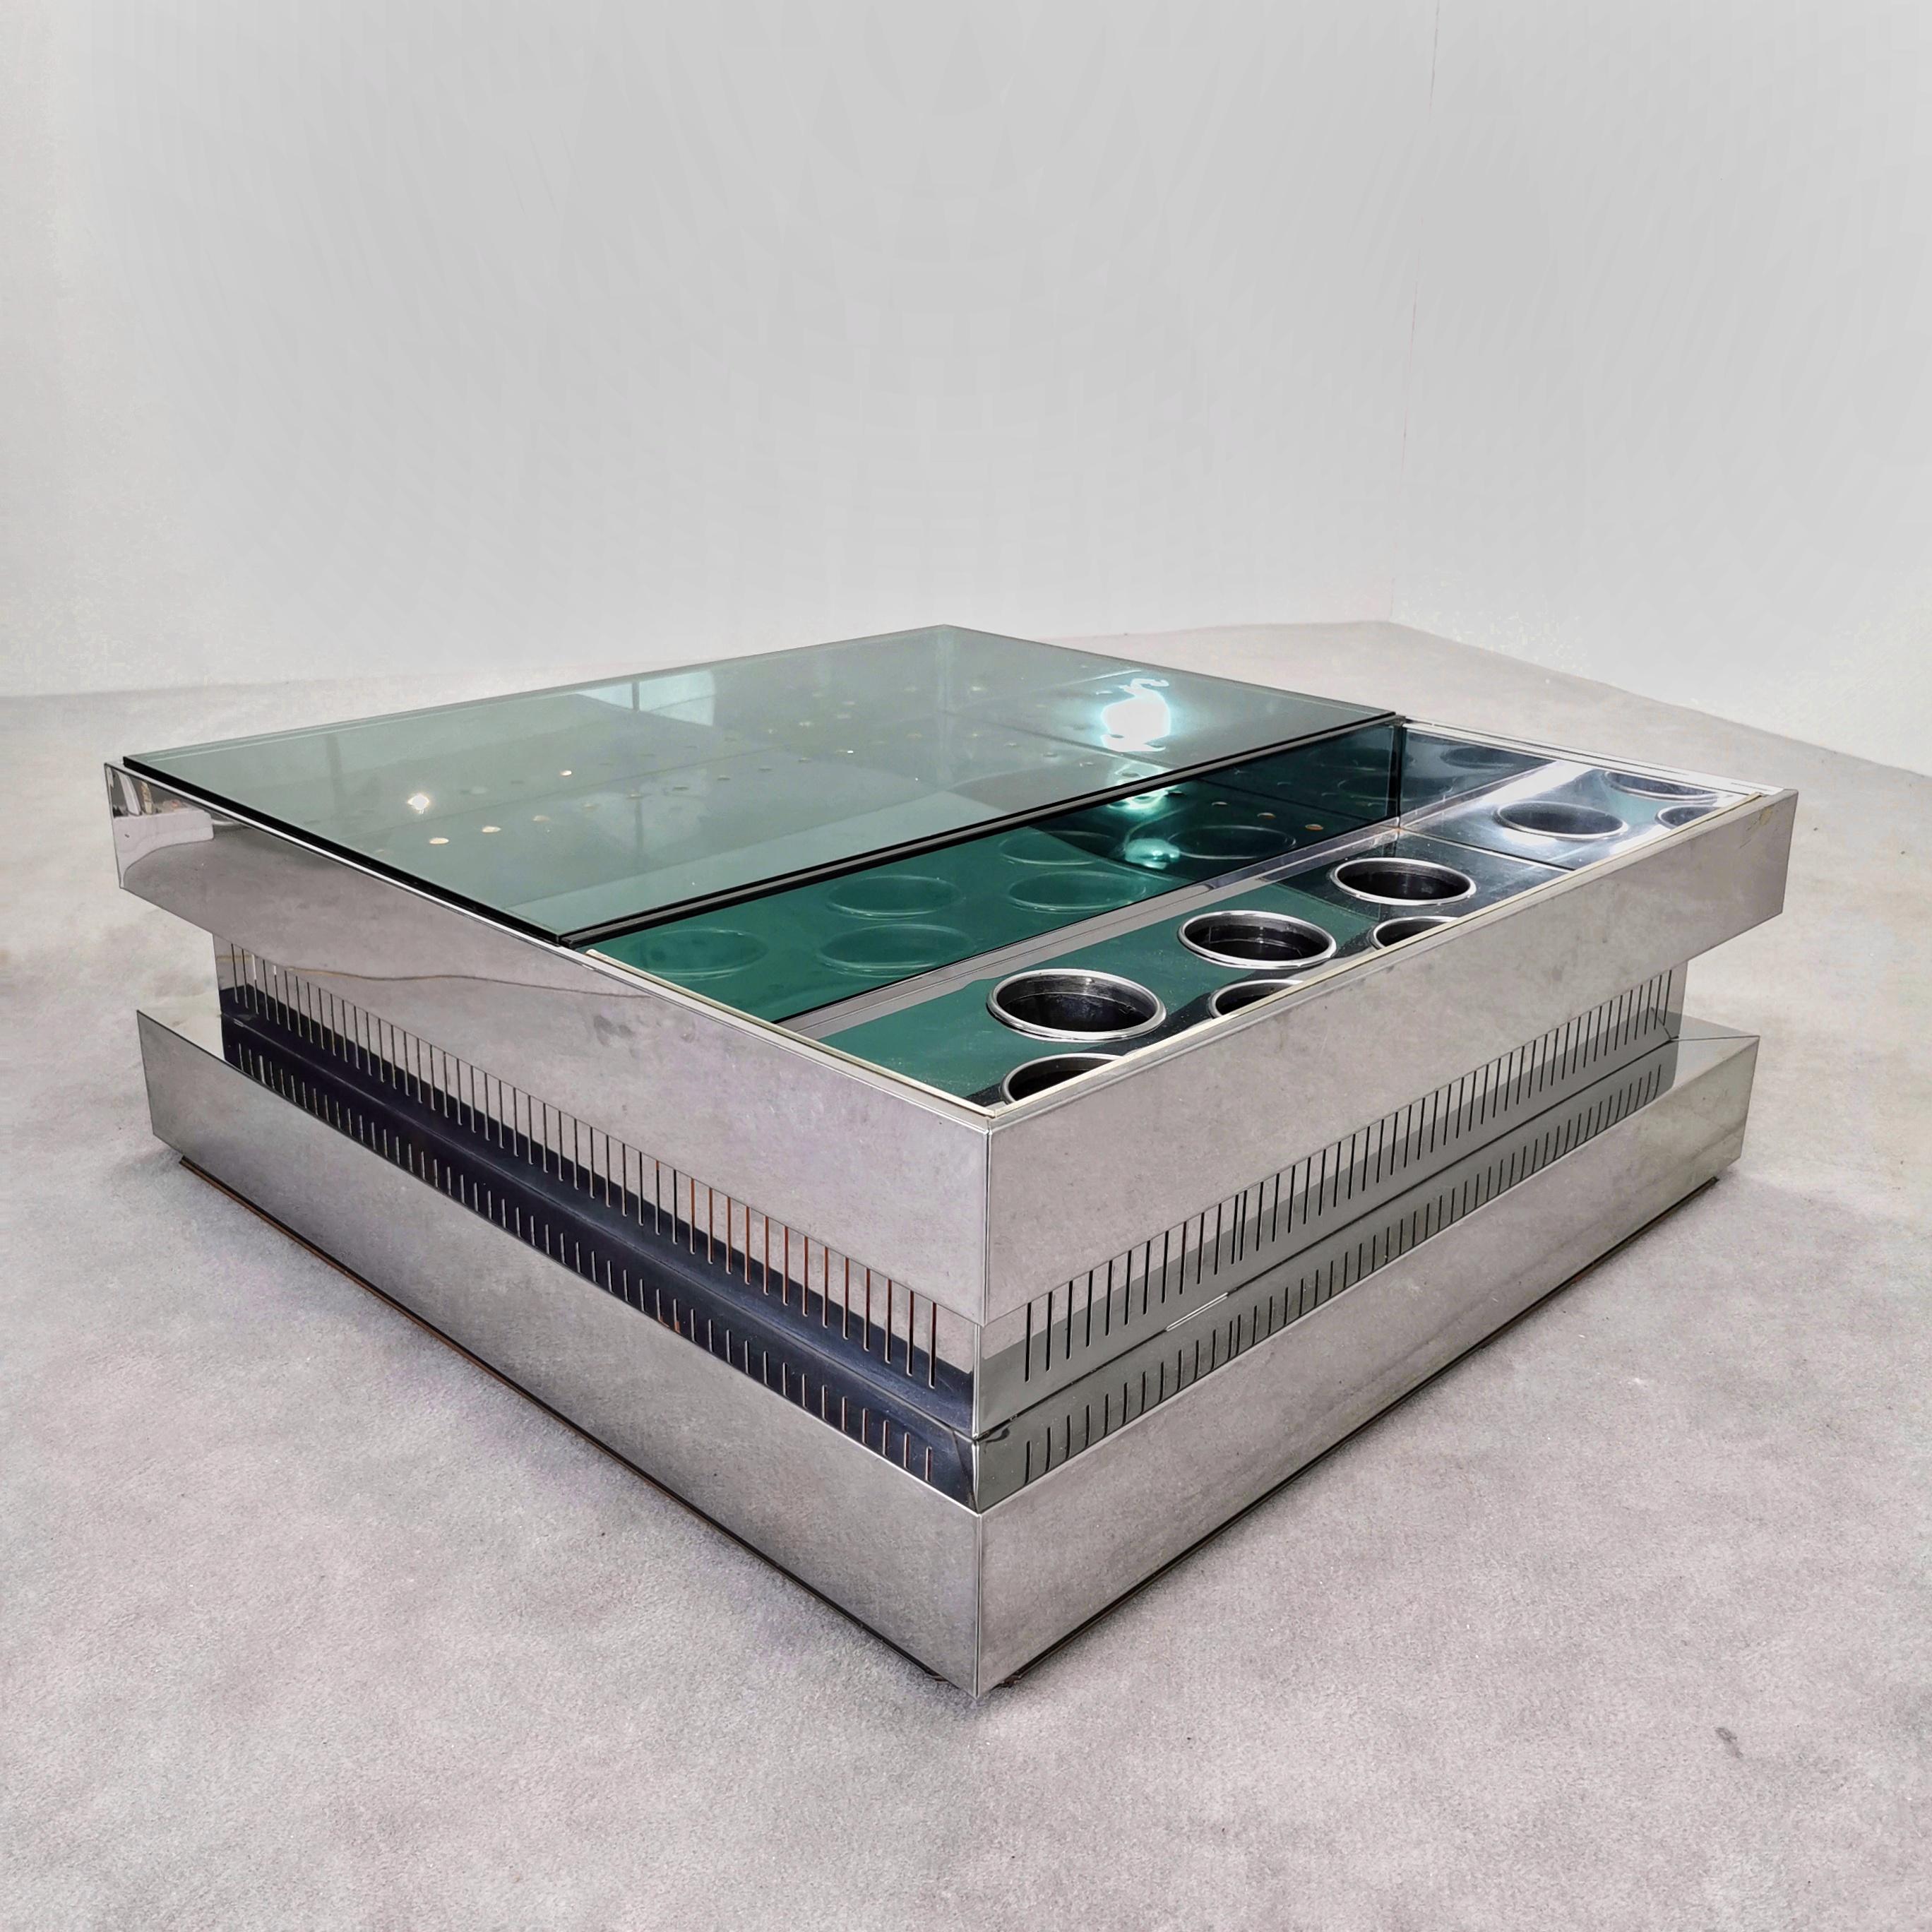 1970s Living Room bar table made of steel sheet and glass. 
Rare space age piece consists of glass top and bottle holder accommodations with pull-out elements. 
The coffee table lights up, creating a special atmosphere at parties or relaxing